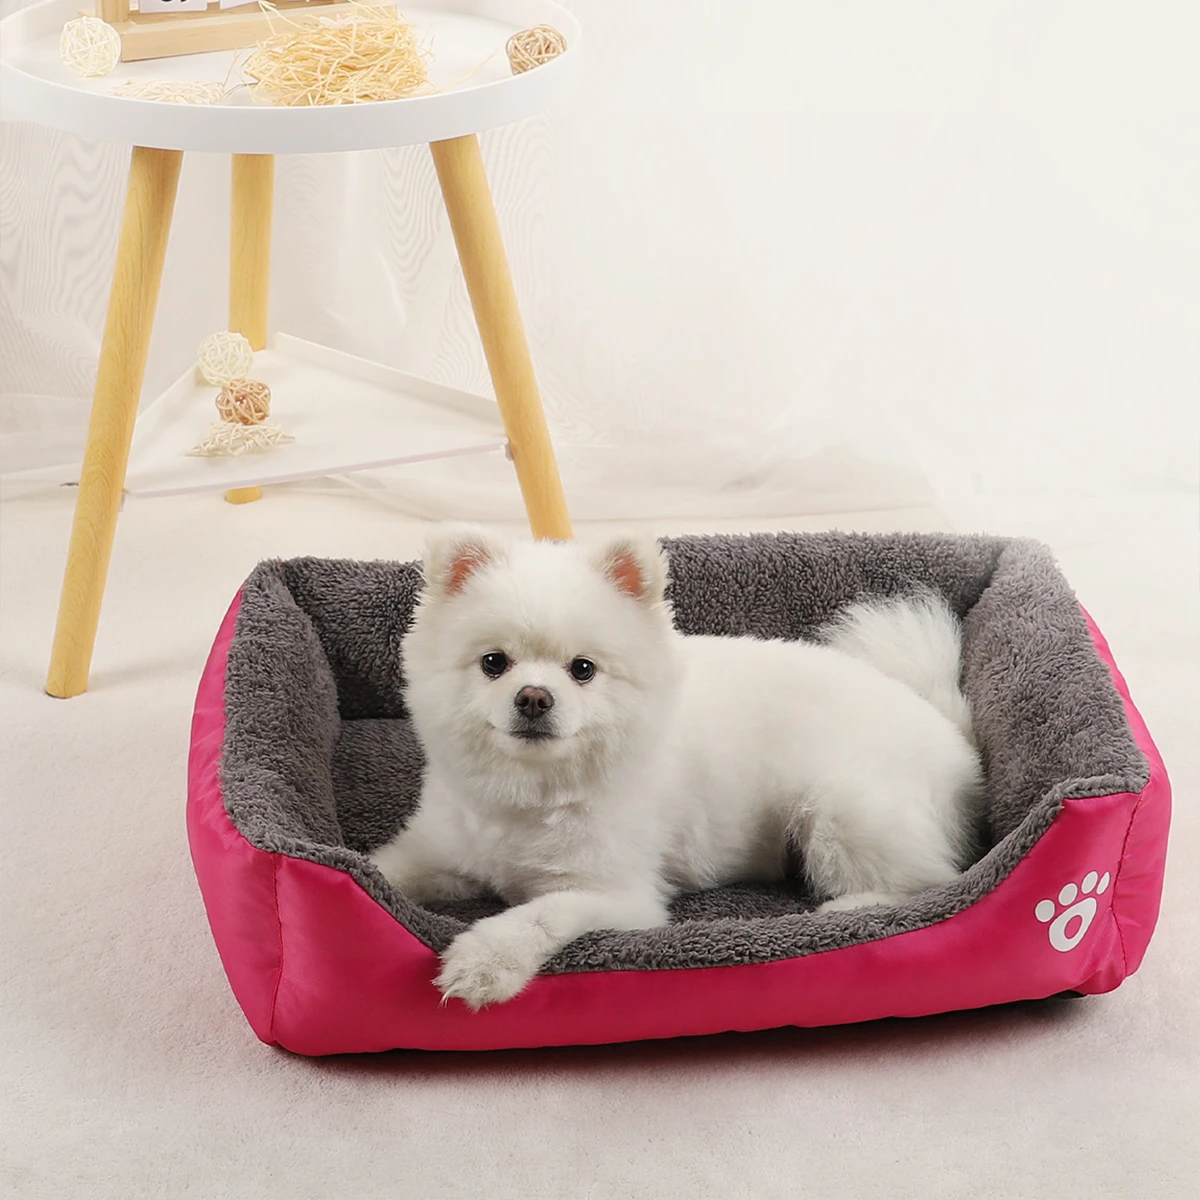 

Dog Bed Pet Beds Cats Sofa Accessories Small Puppy Big Cushion Dogs Pets Supplies Baskets Large Basket Mat Bedding Kennel Fluffy